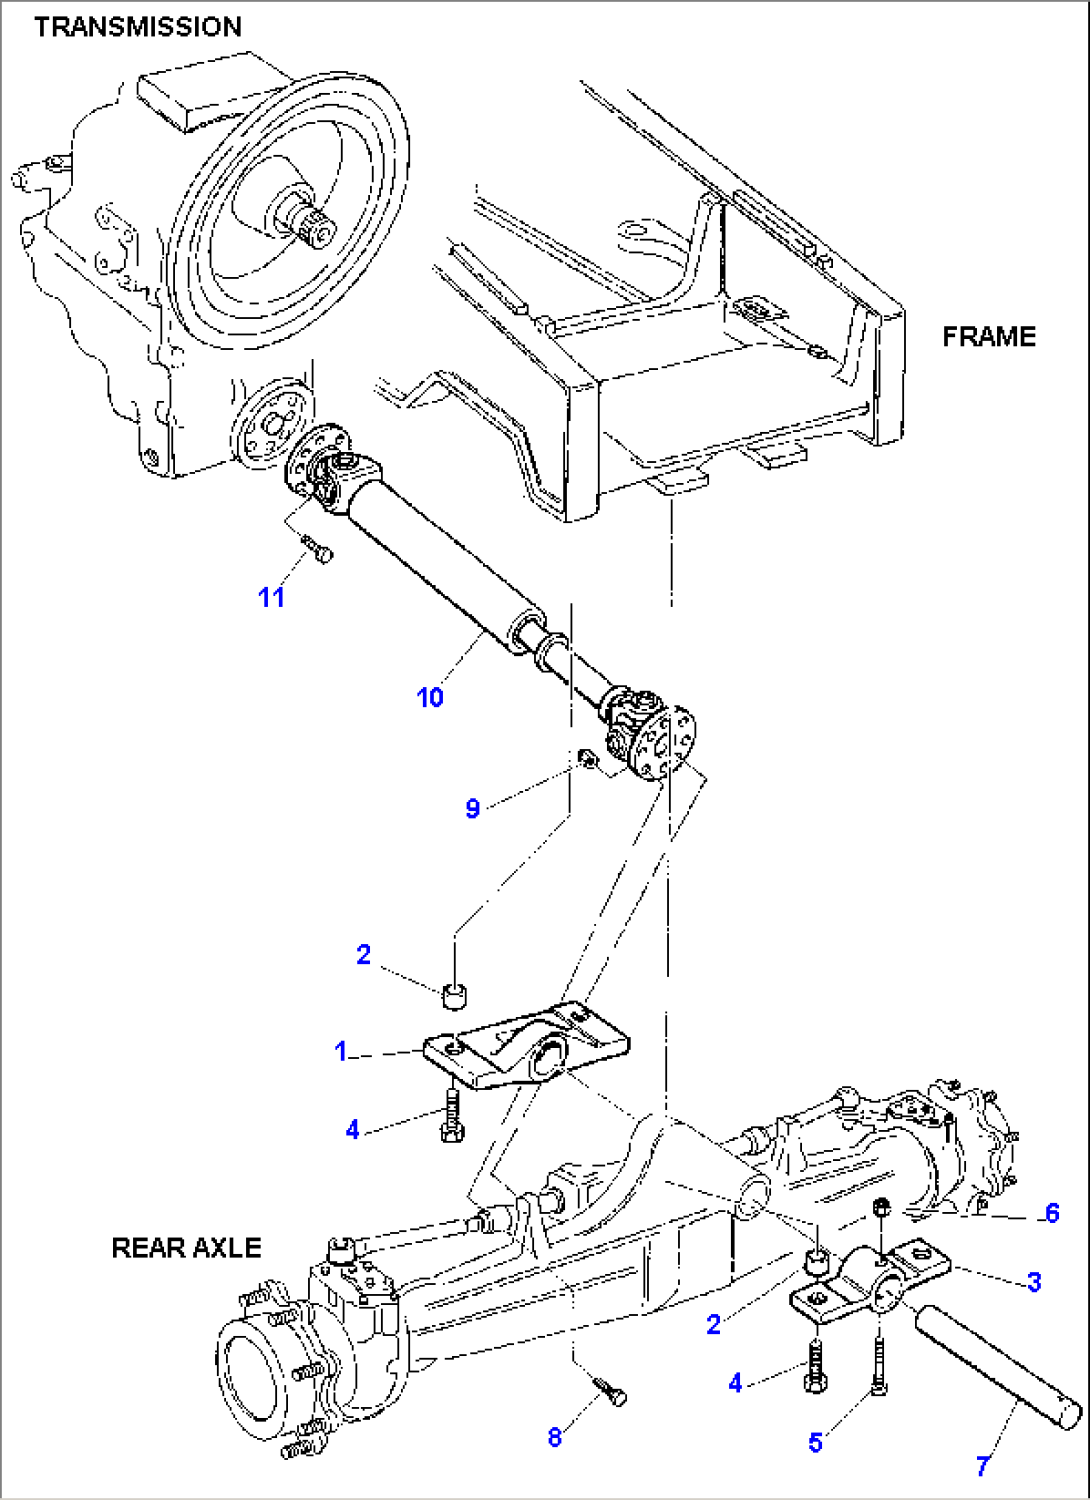 FRONT PROPELLER SHAFT AND FRONT AXLE FIXING (4WD)